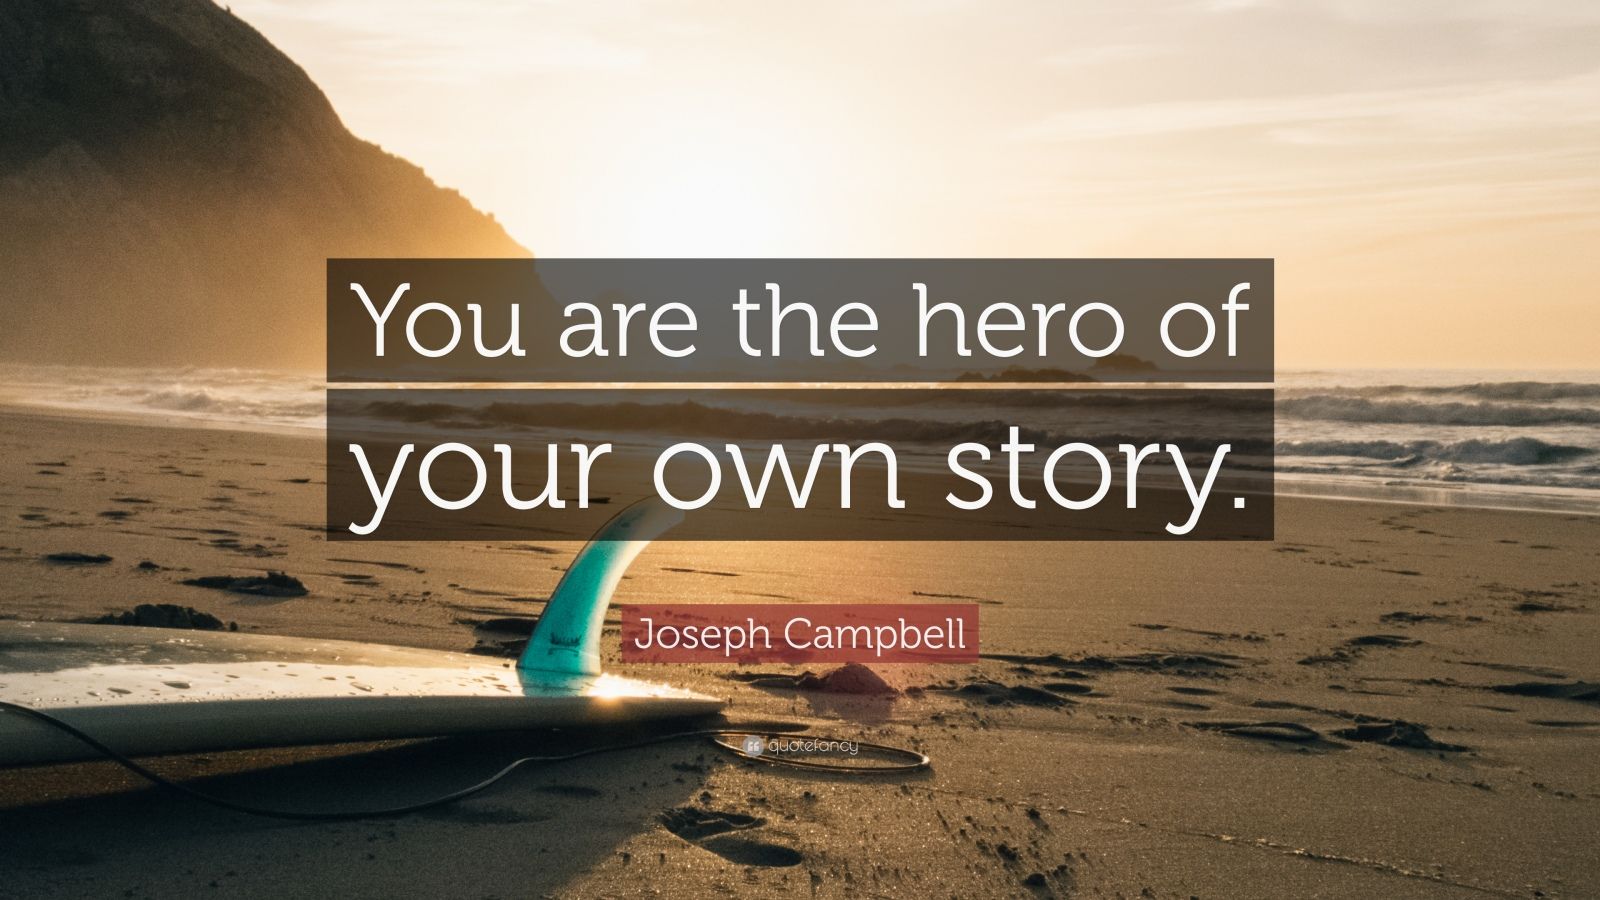 Joseph Campbell Quote: “You are the hero of your own story.” (28